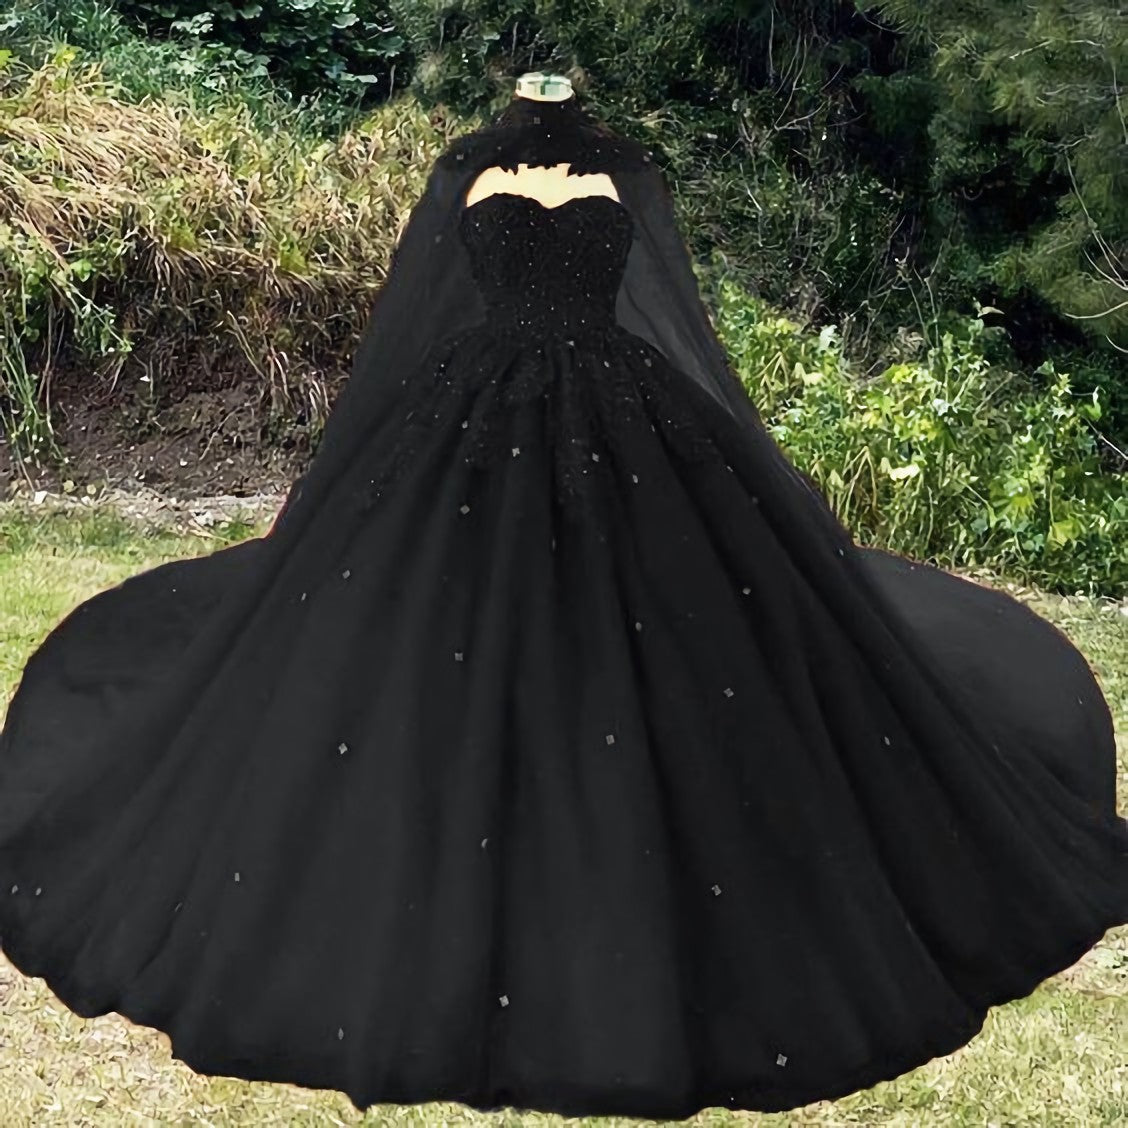 Vintage Black Wedding Dress, Ball Gown For Gothic Weddings With Cape Prom Dress, Evening Dress